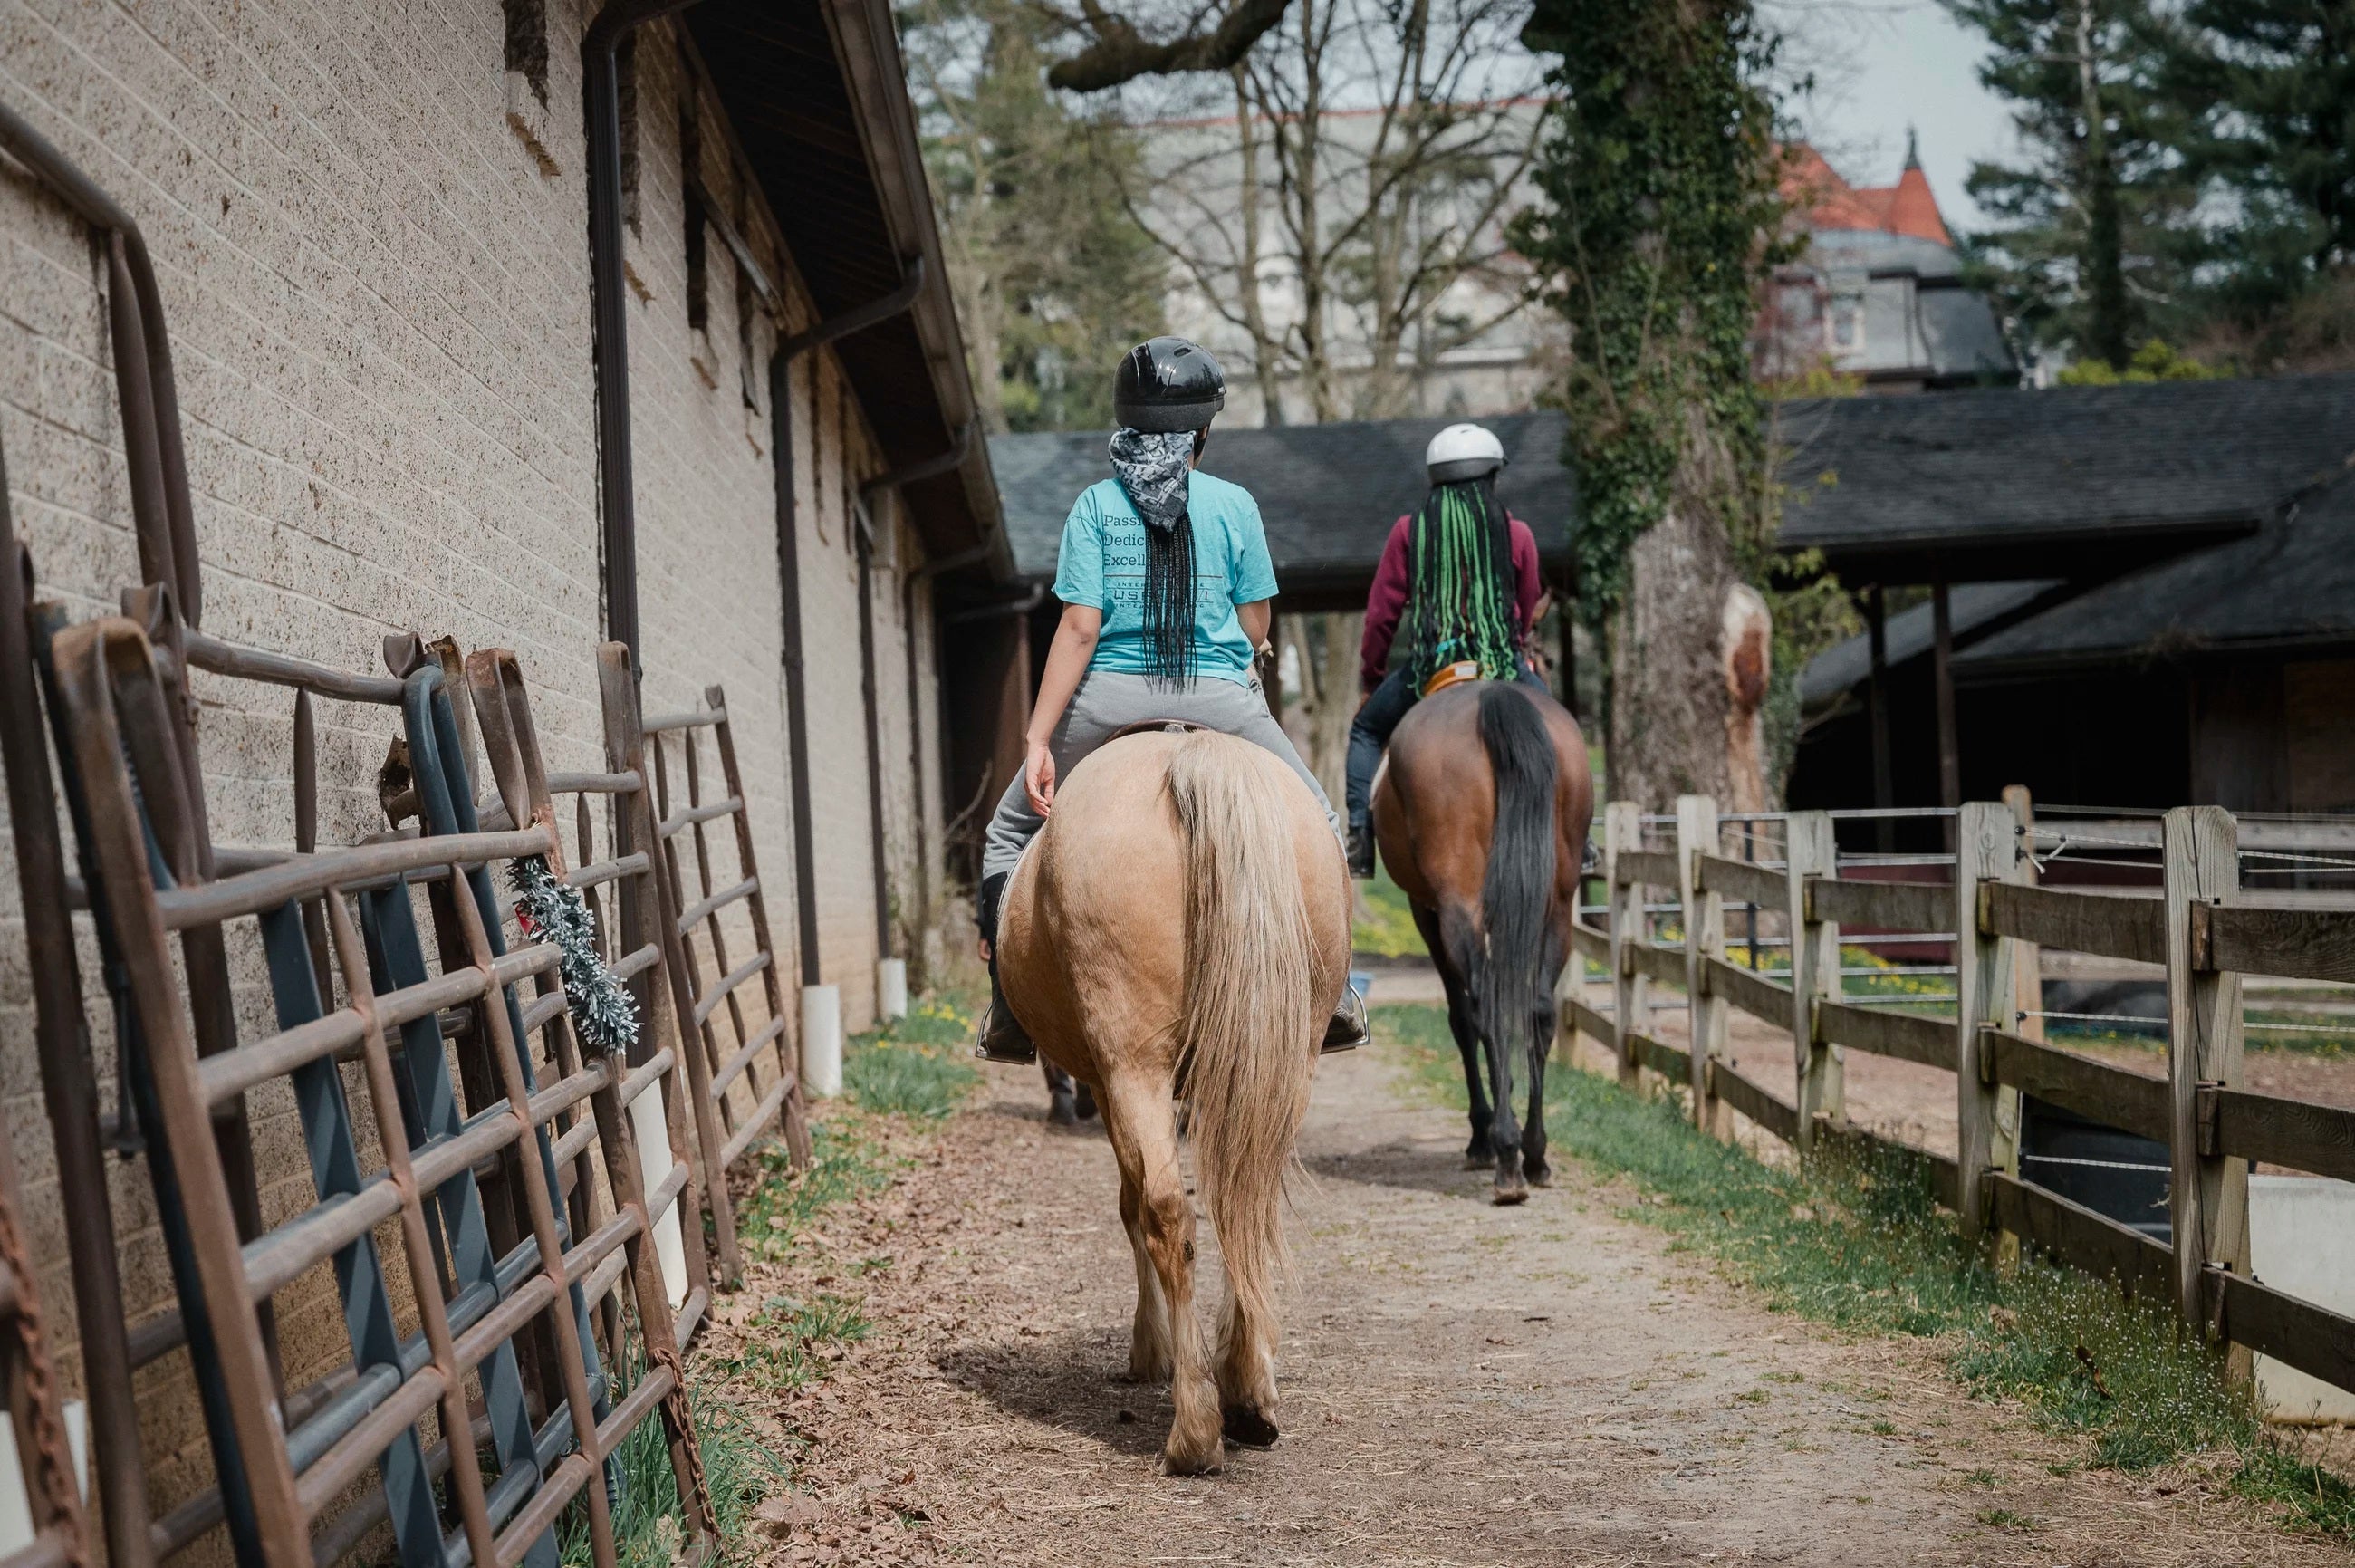 Two riders ride their horses at the Northwestern Stables in Philadelphia